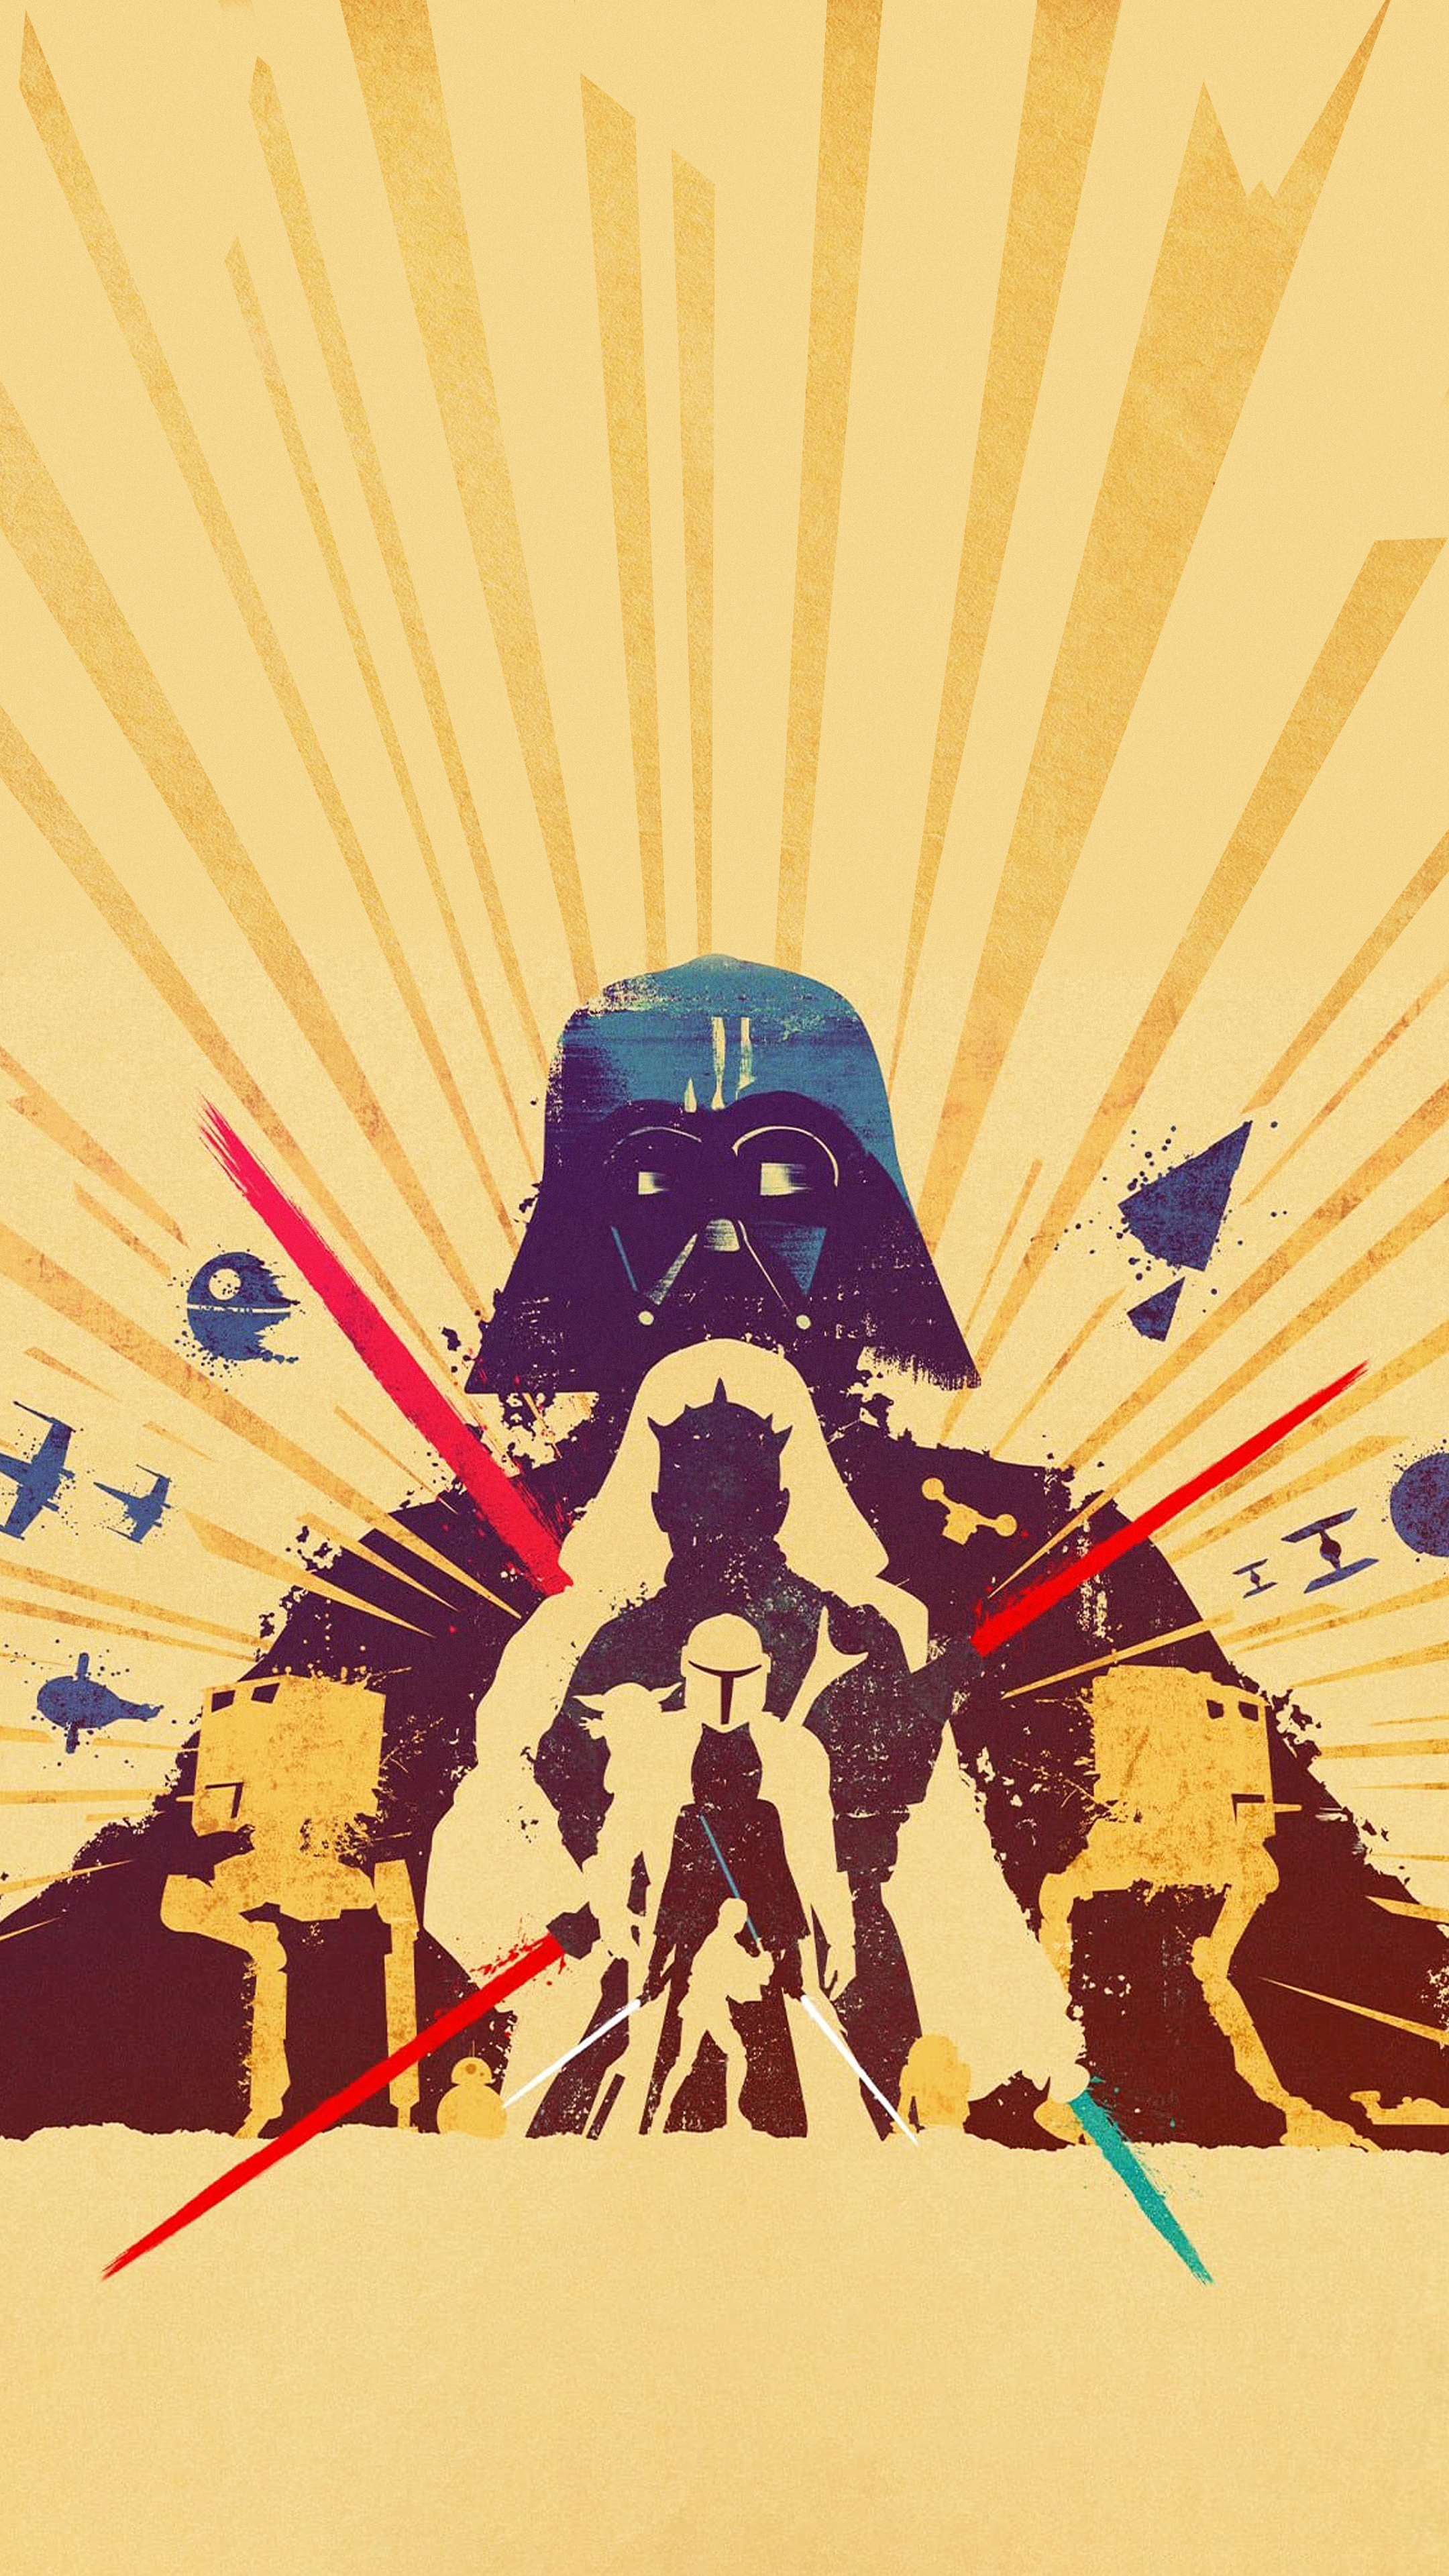 Converted S Star Wars Celebration Poster Into A Mobile